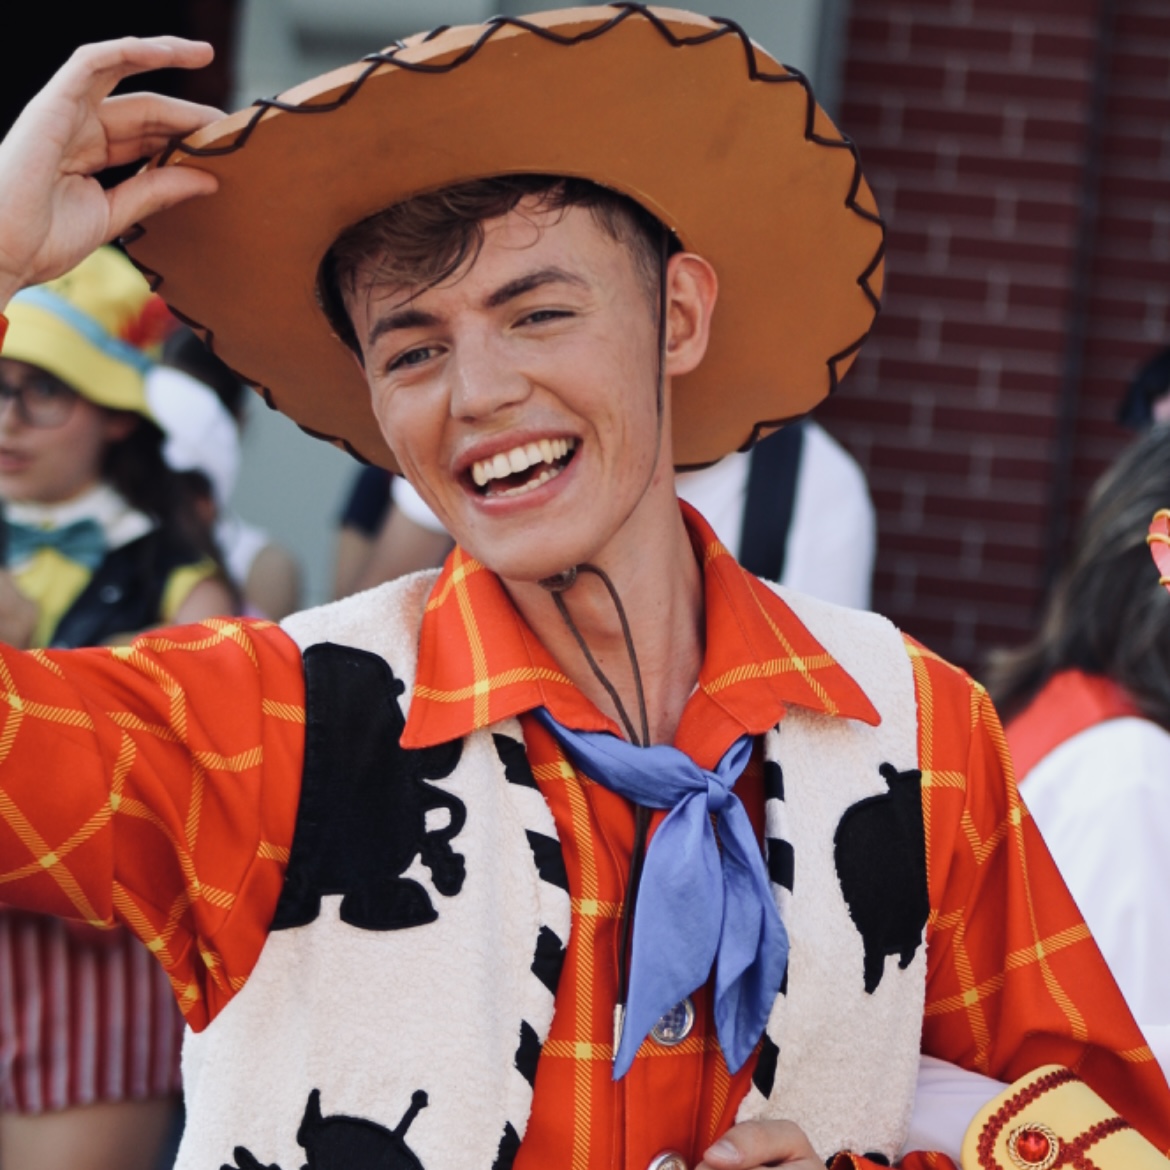 Daffyd in costume as Woody from Toy Story 